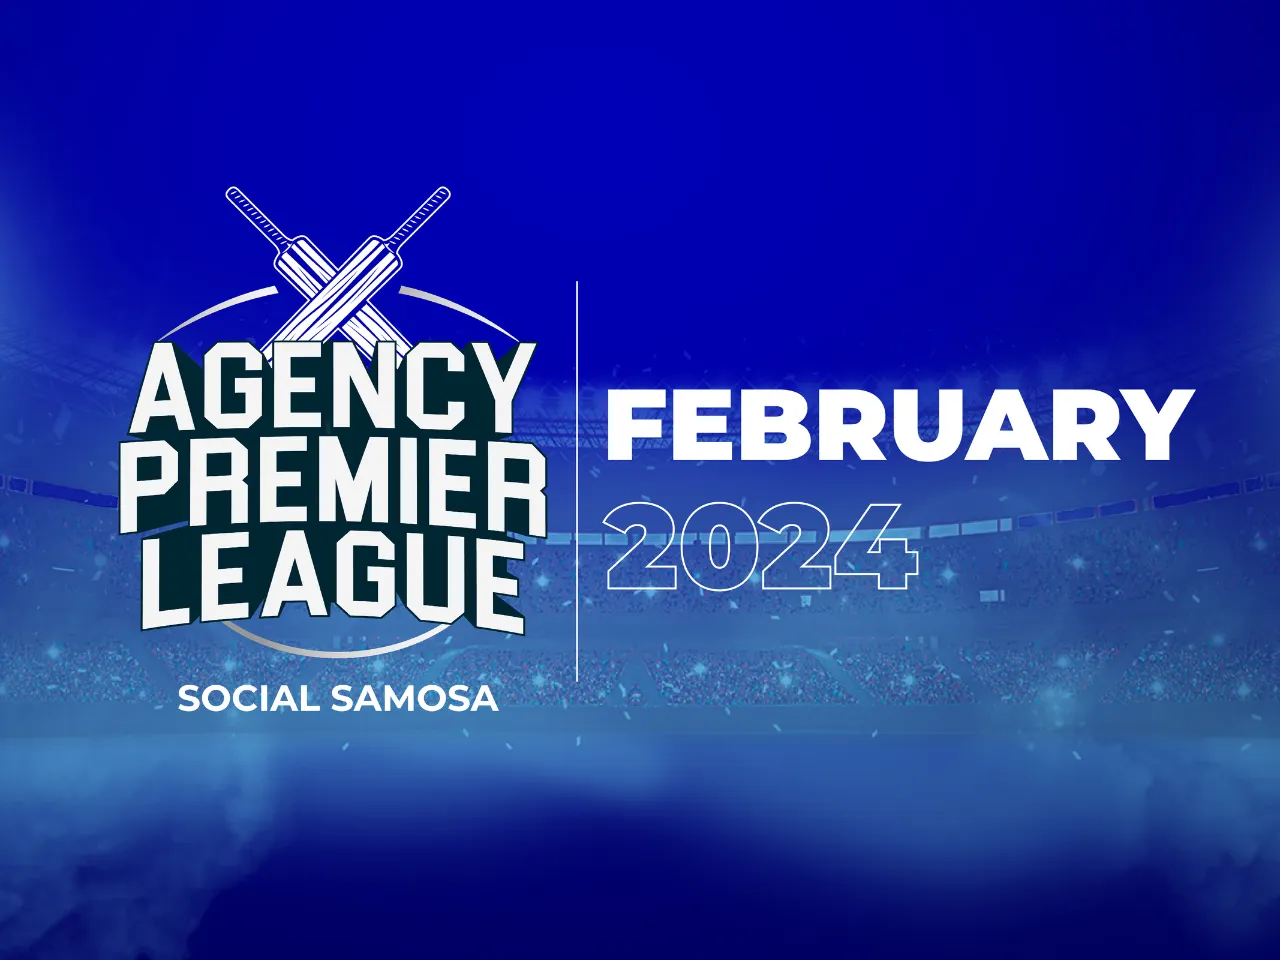 Agency Premier League: A guidebook answering all your FAQs